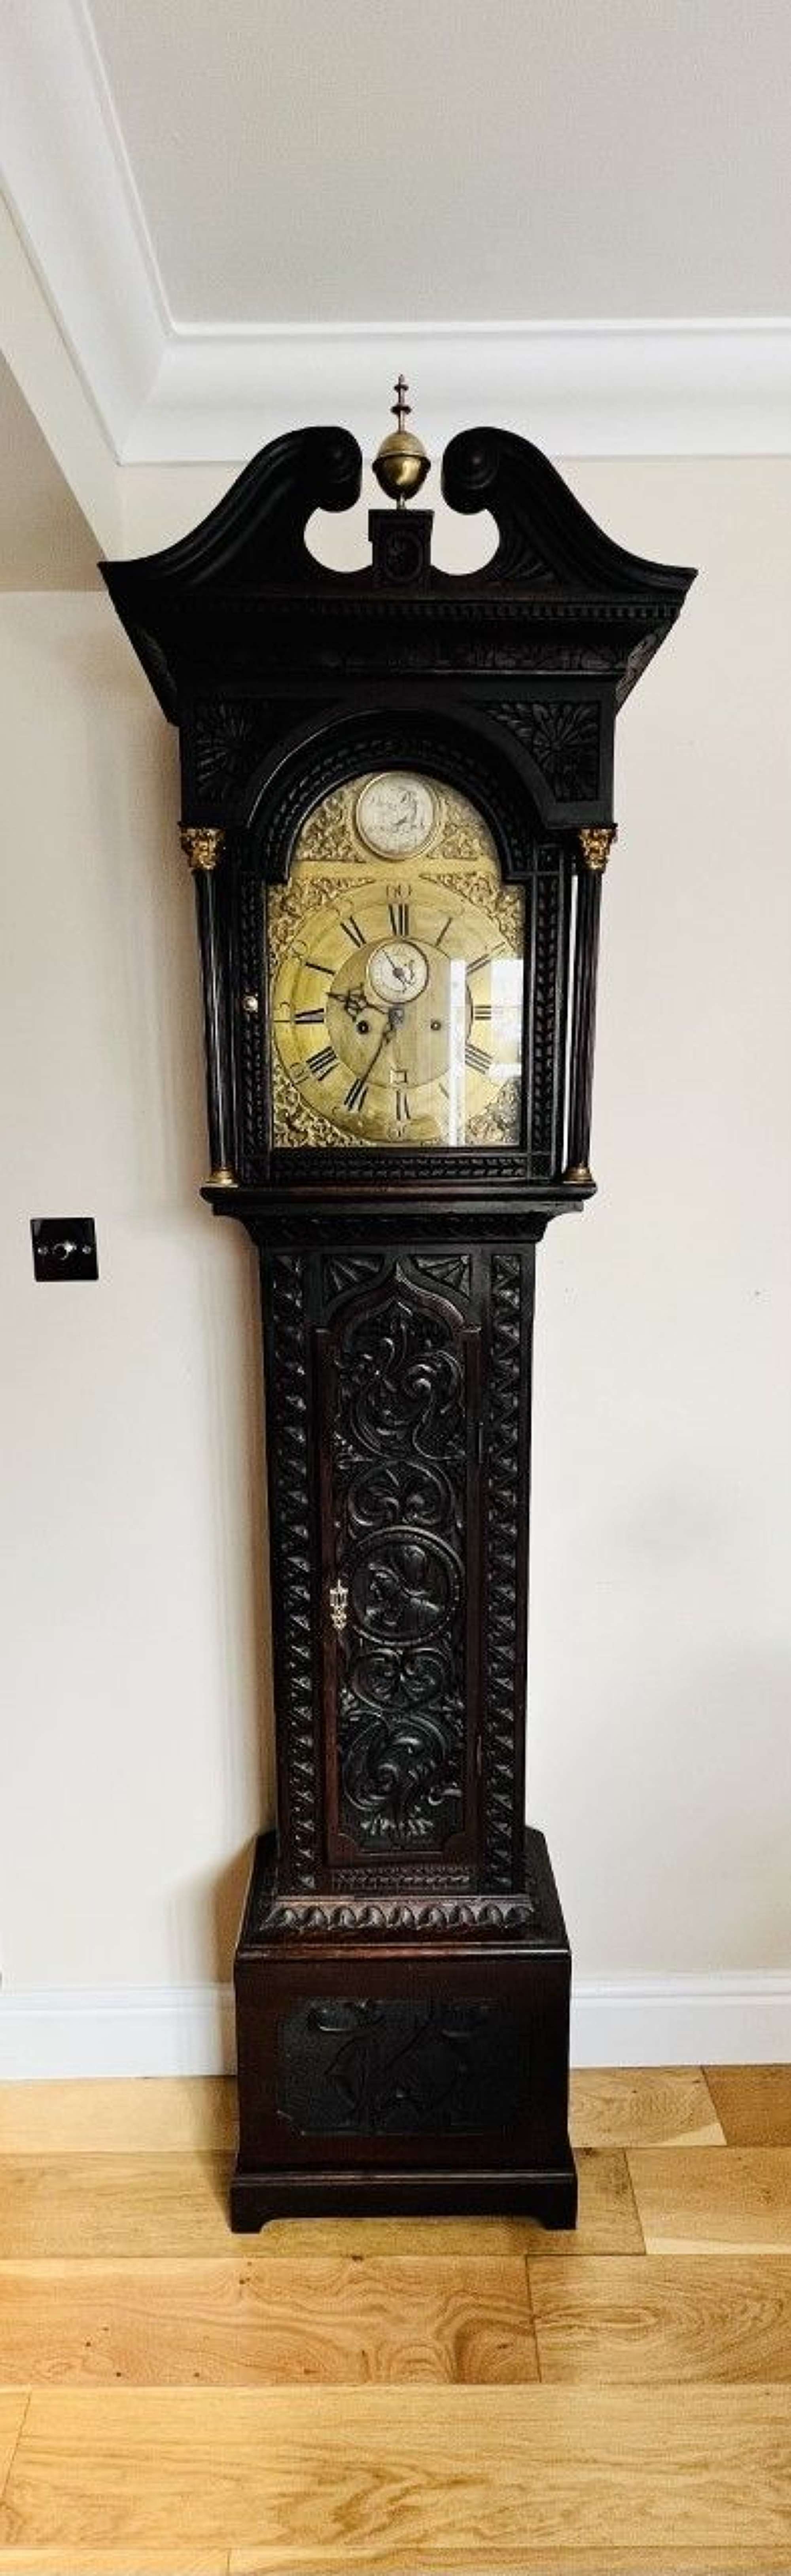 Stunning Quality Antique George Iii 8 Day Long Case Clock